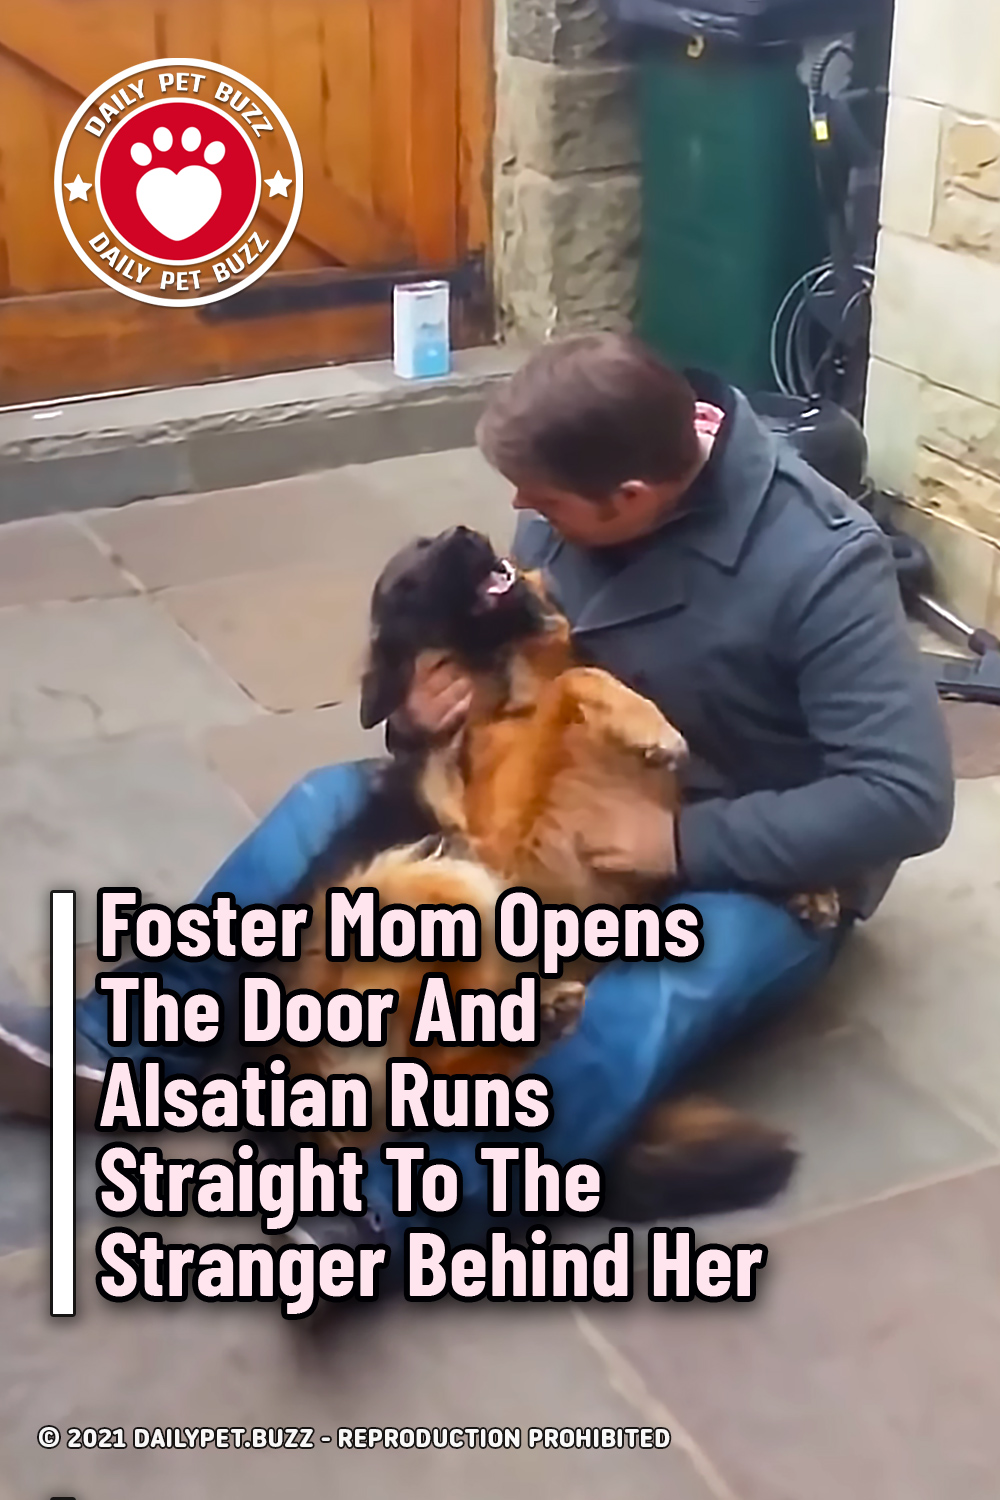 Foster Mom Opens The Door And Alsatian Runs Straight To The Stranger Behind Her